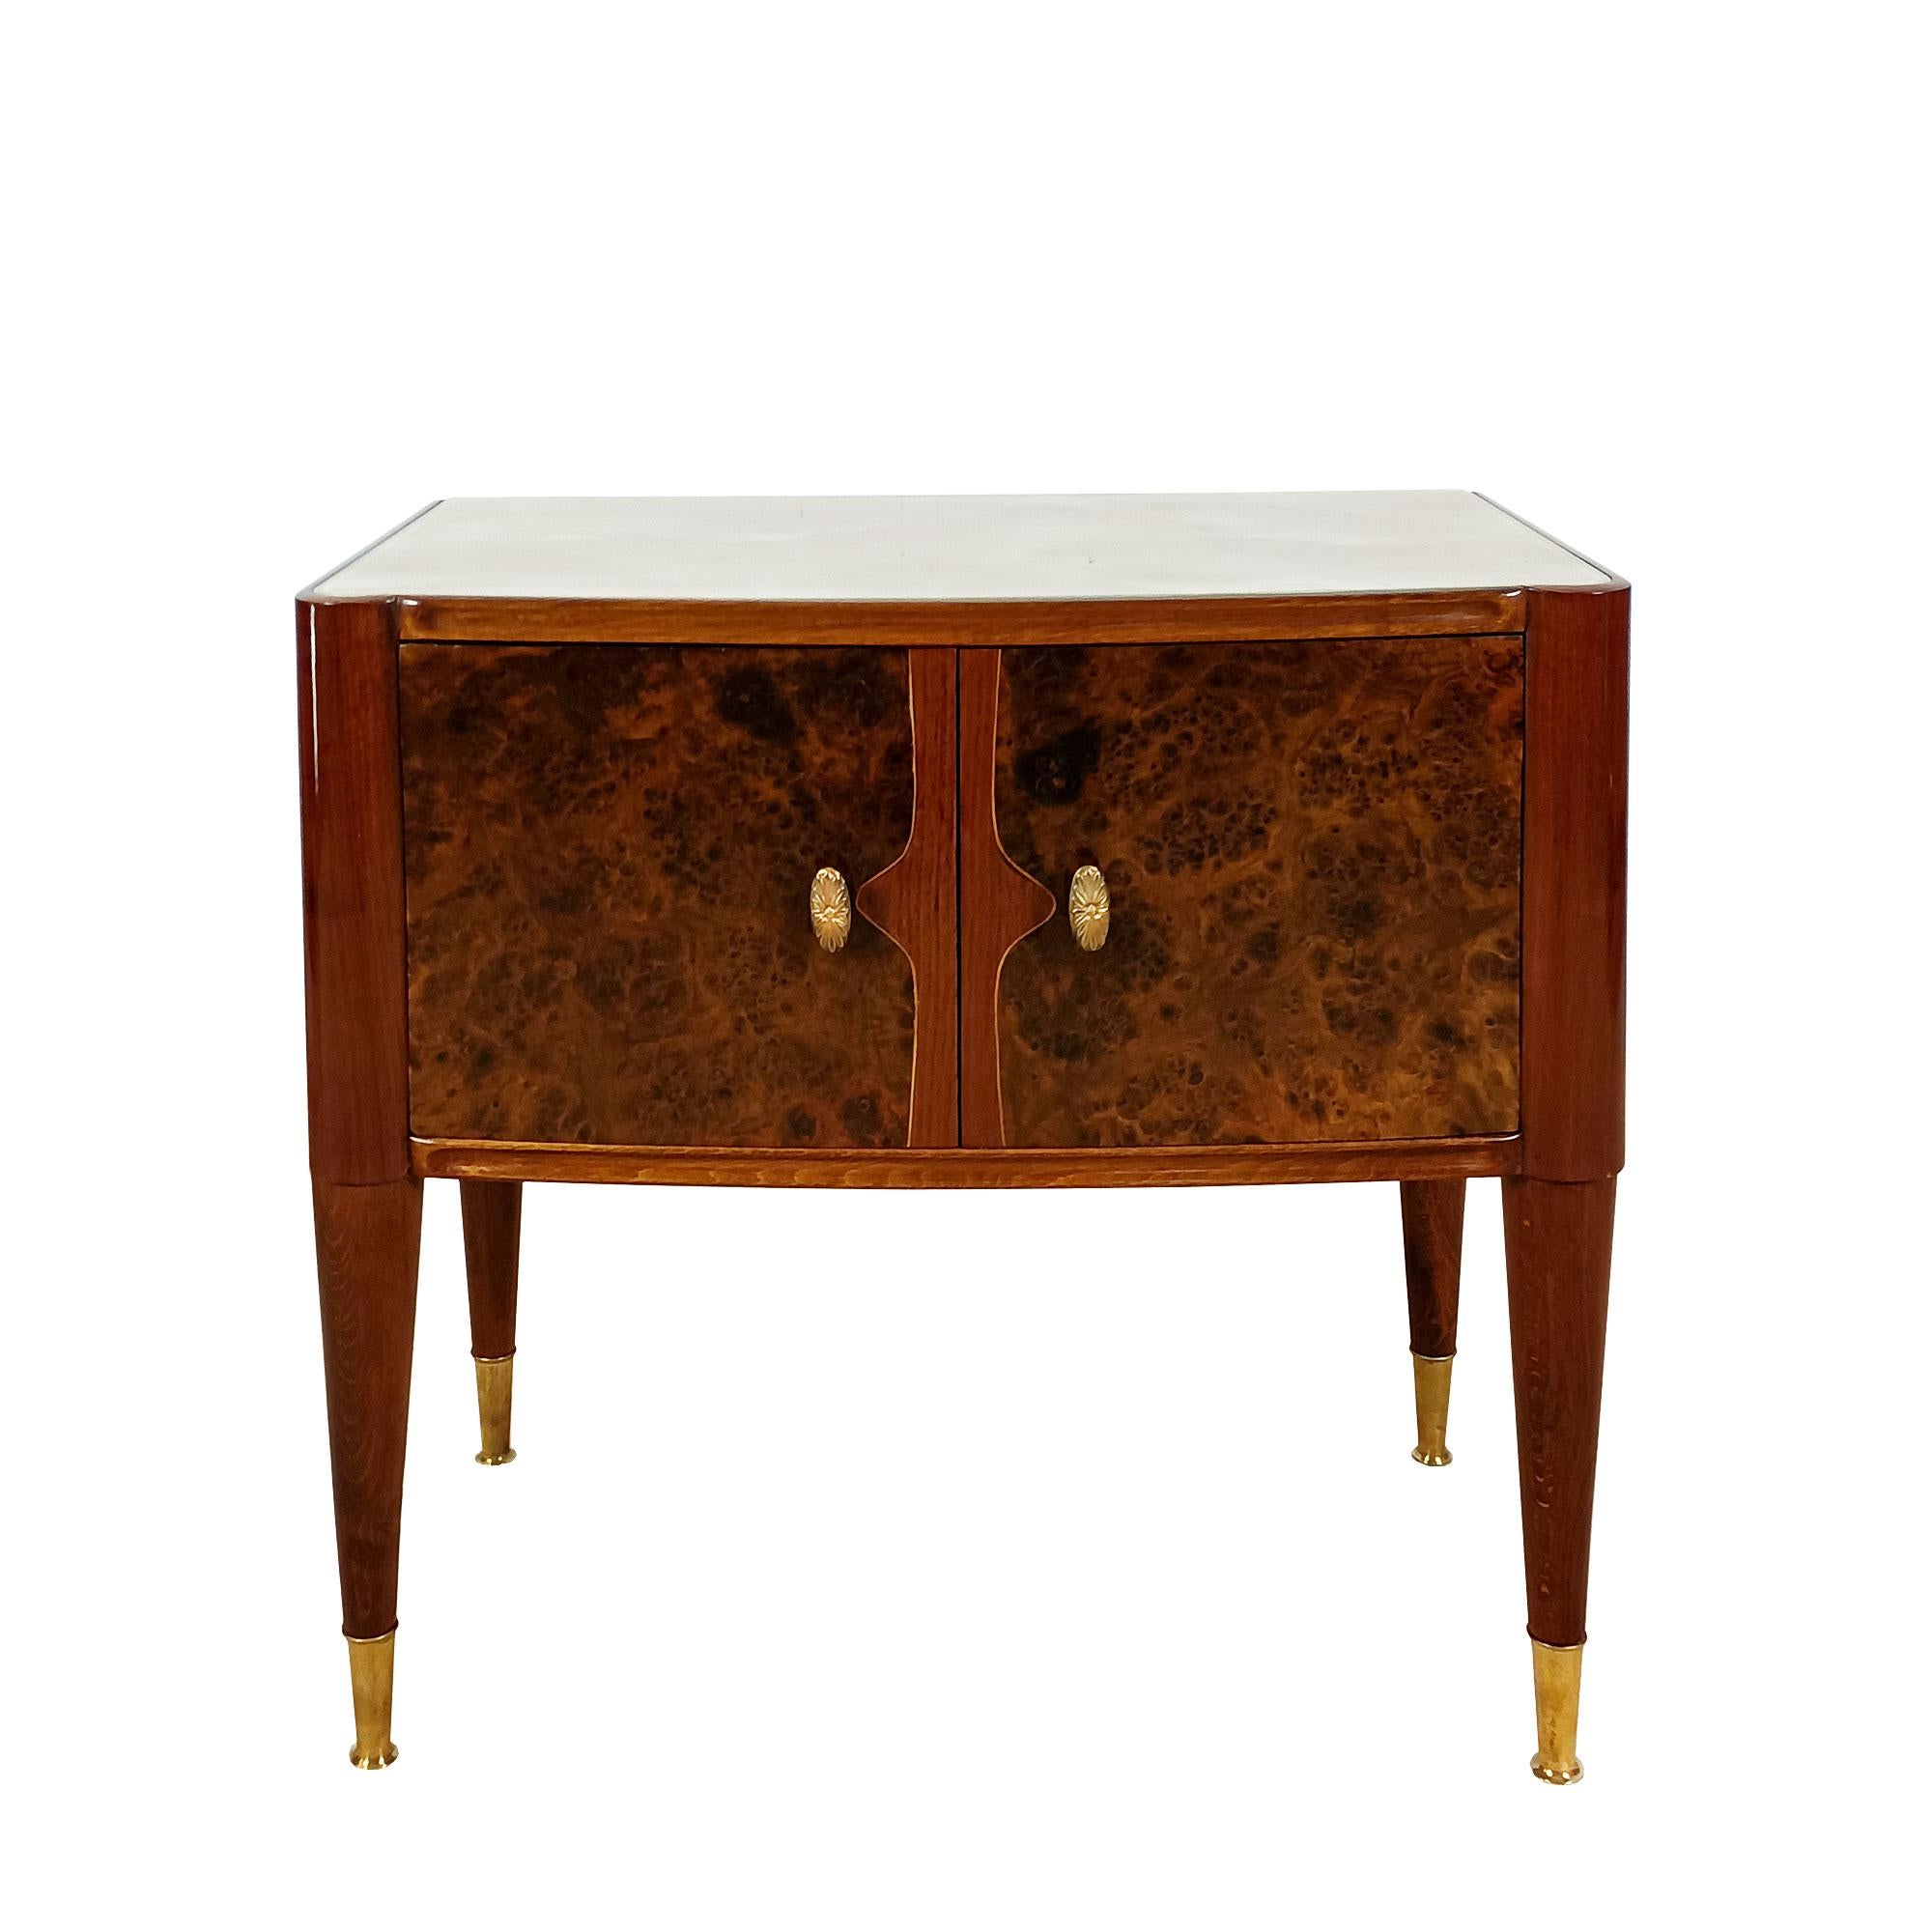 Pair of solid mahogany night stands with mahogany and burl walnut veneer and lemon tree rodss on the doors, imitation marble glass on top (minor defects), polished brass handles and feet. French polish.

Italy circa 1940